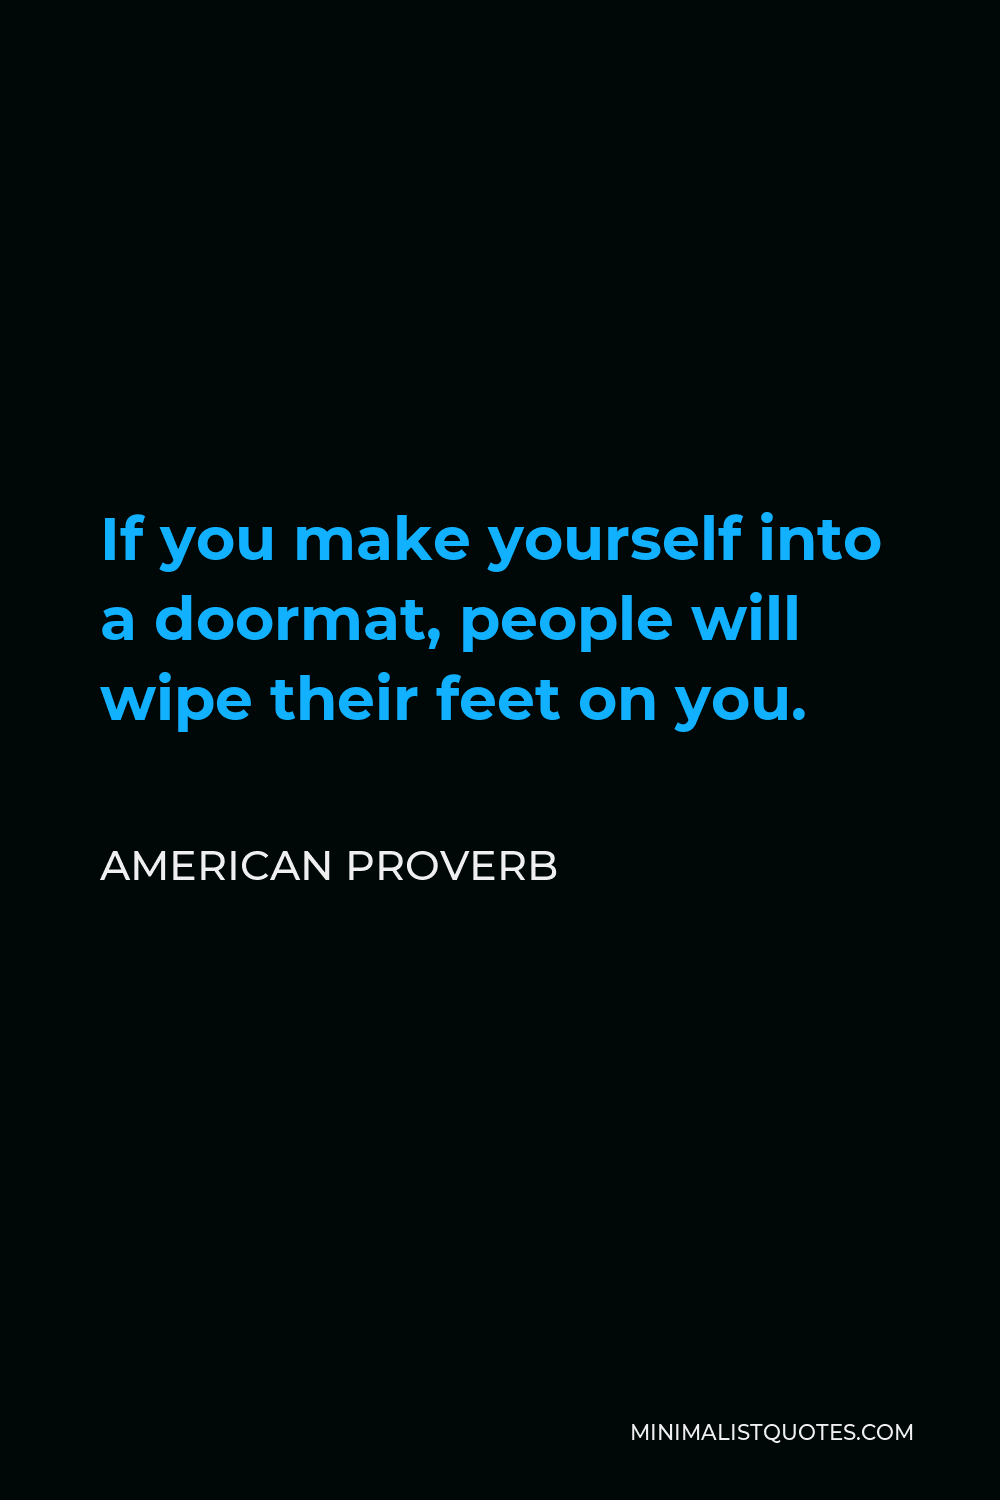 American Proverb Quote - If you make yourself into a doormat, people will wipe their feet on you.